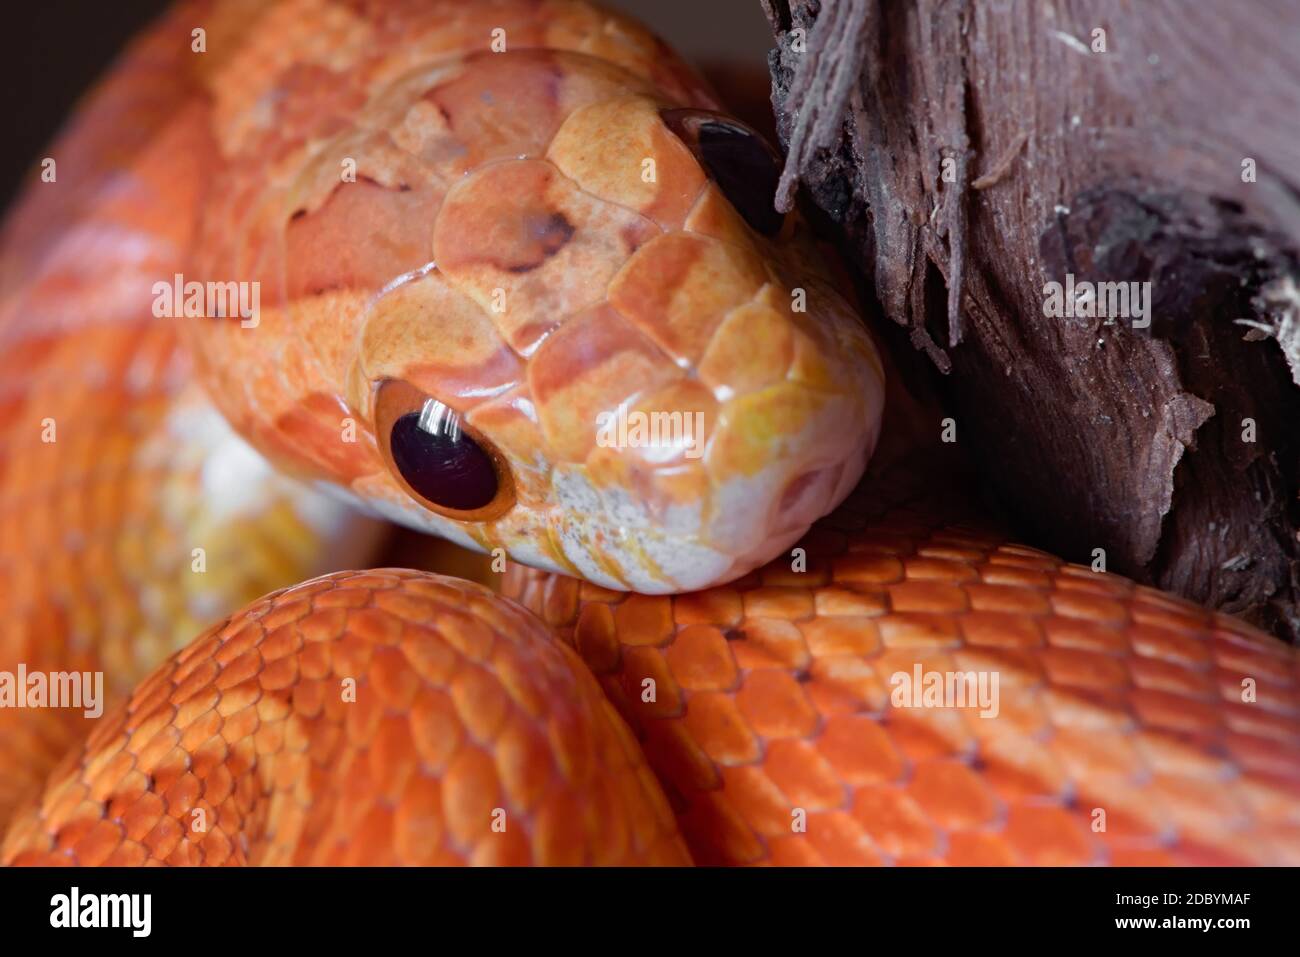 Super close up macro image, front view of pet orange corn snakes face. Mouth and beady round black eyes are clearly visible. Stock Photo